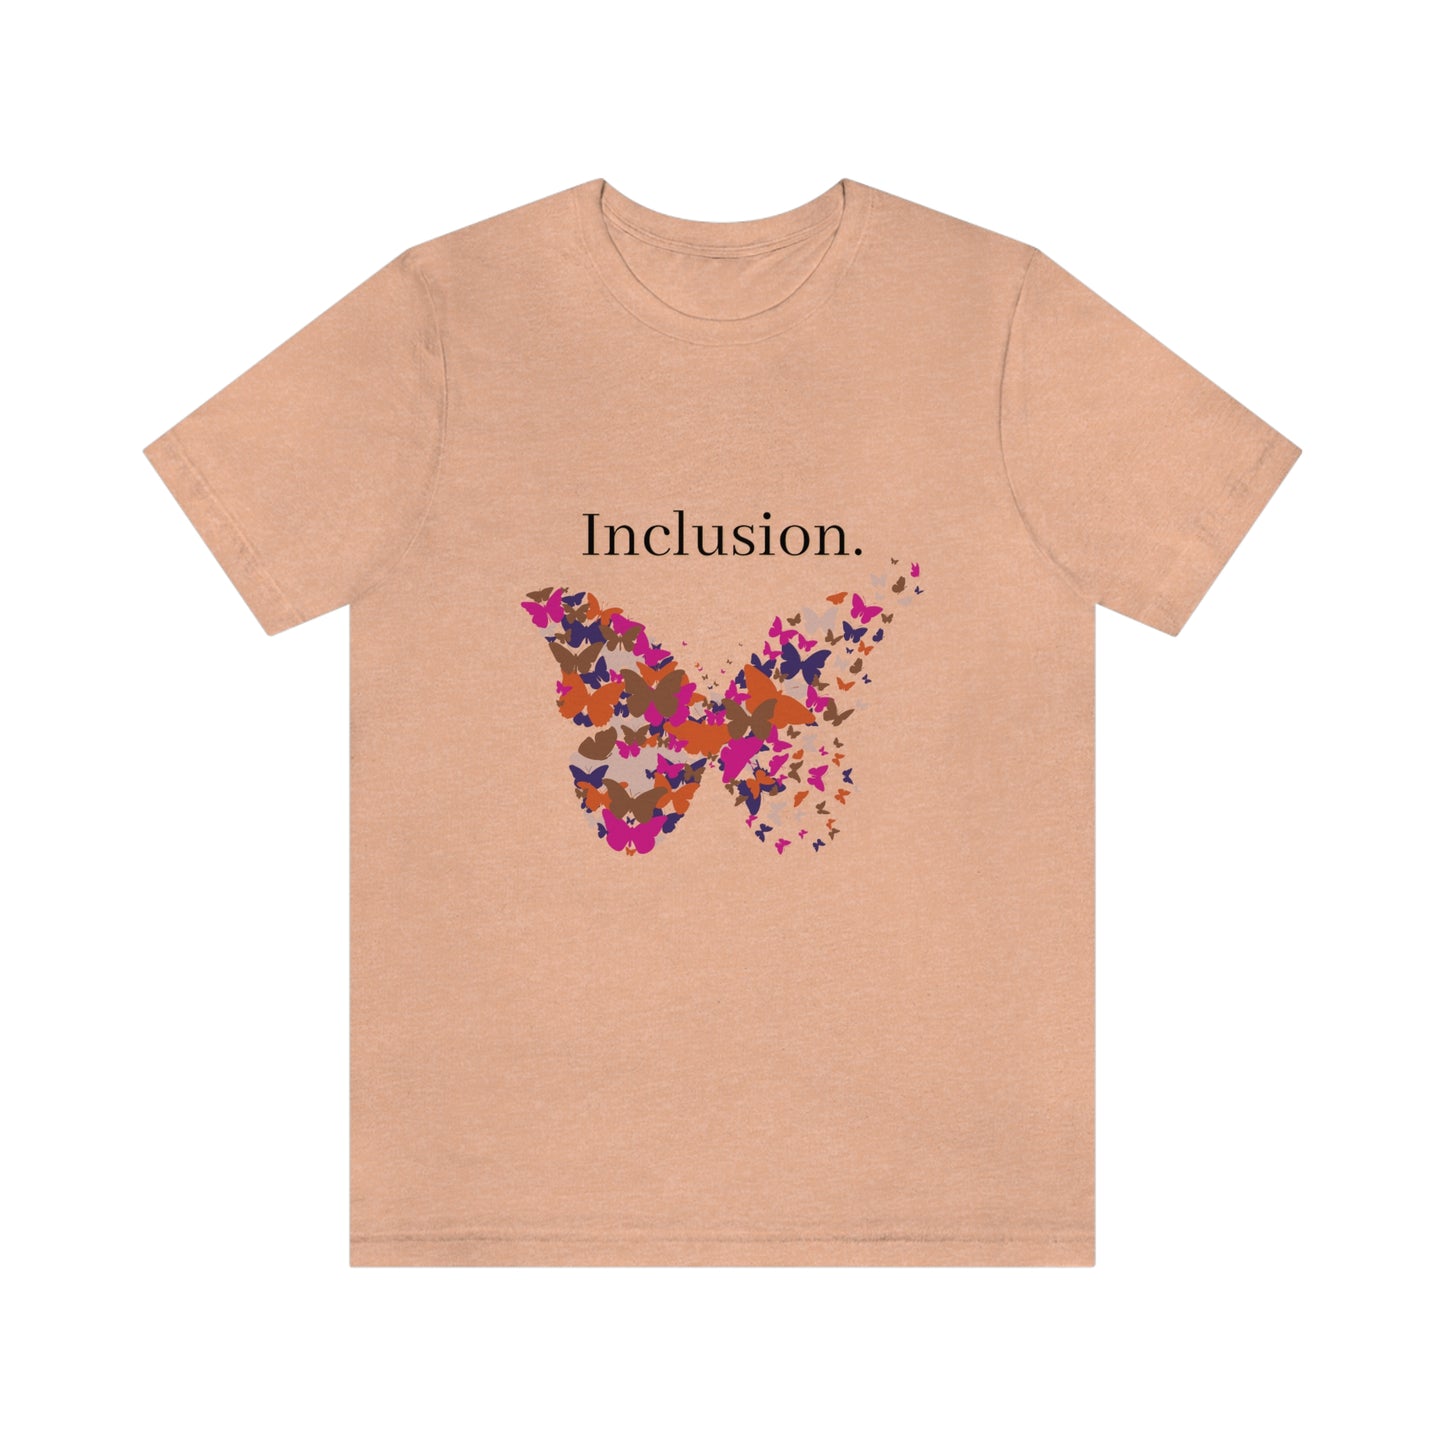 Inclusion Shirt Butterflies Purple, Diversity Inclusion Tshirts, DEIB Statement Tees, Inclusion is an Act Tees